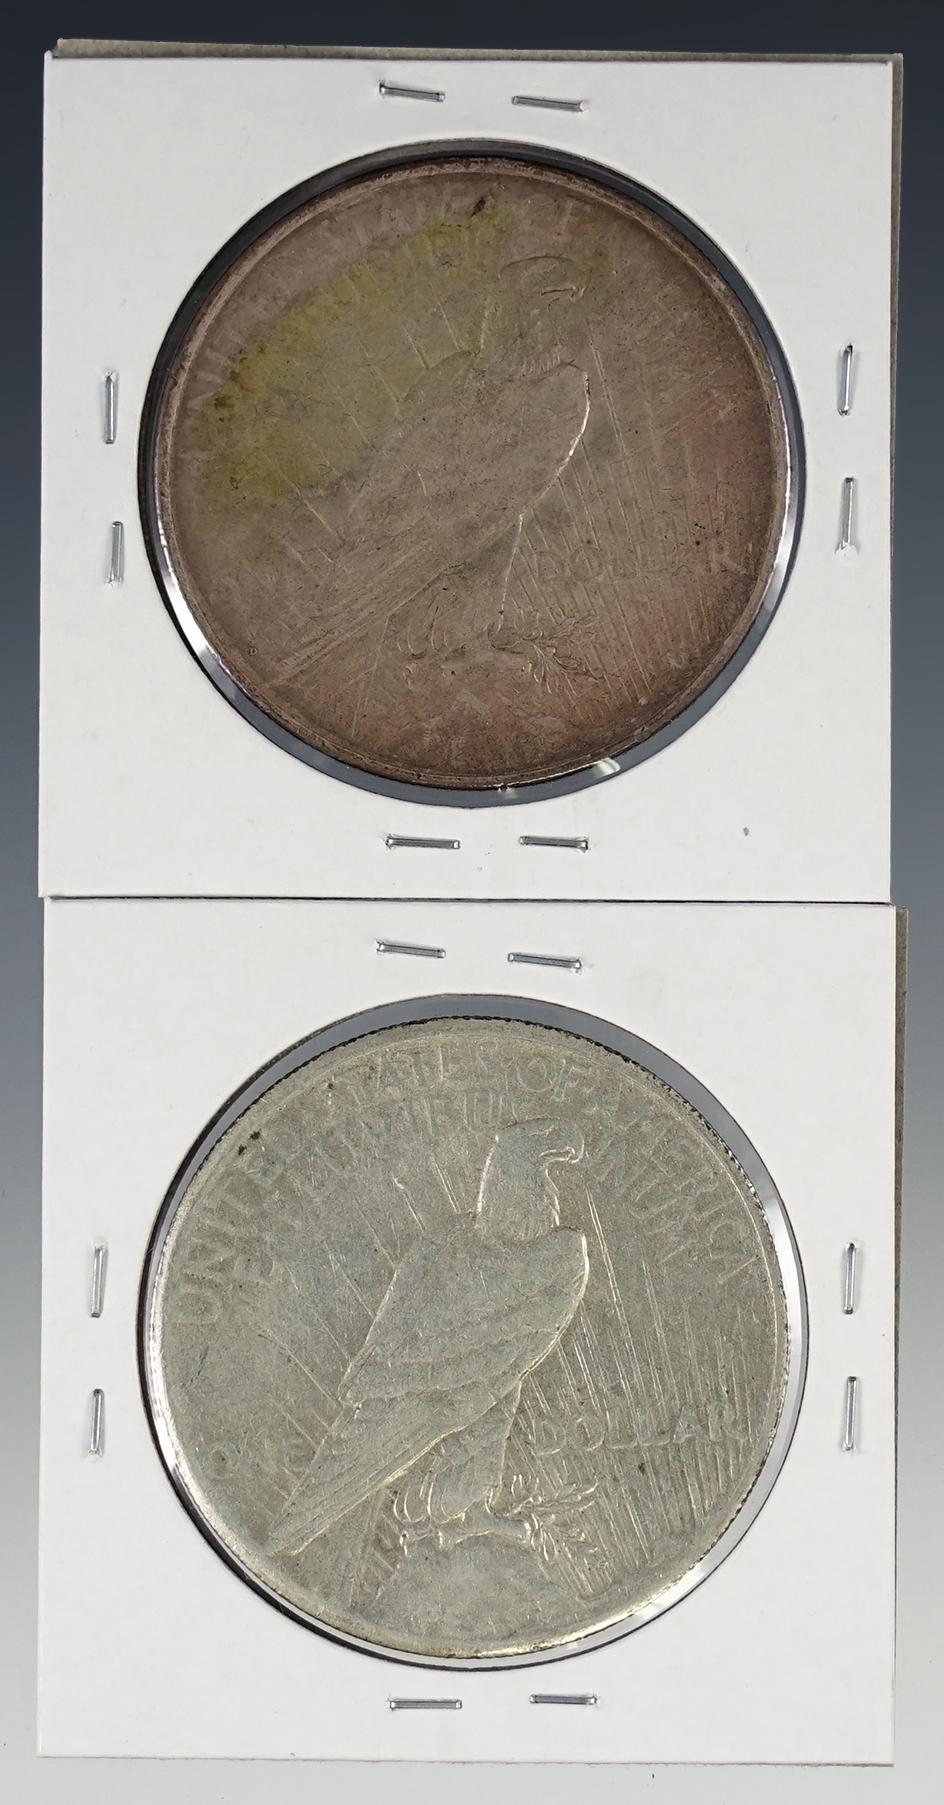 1926 and 1926-D Peace Silver Dollars XF